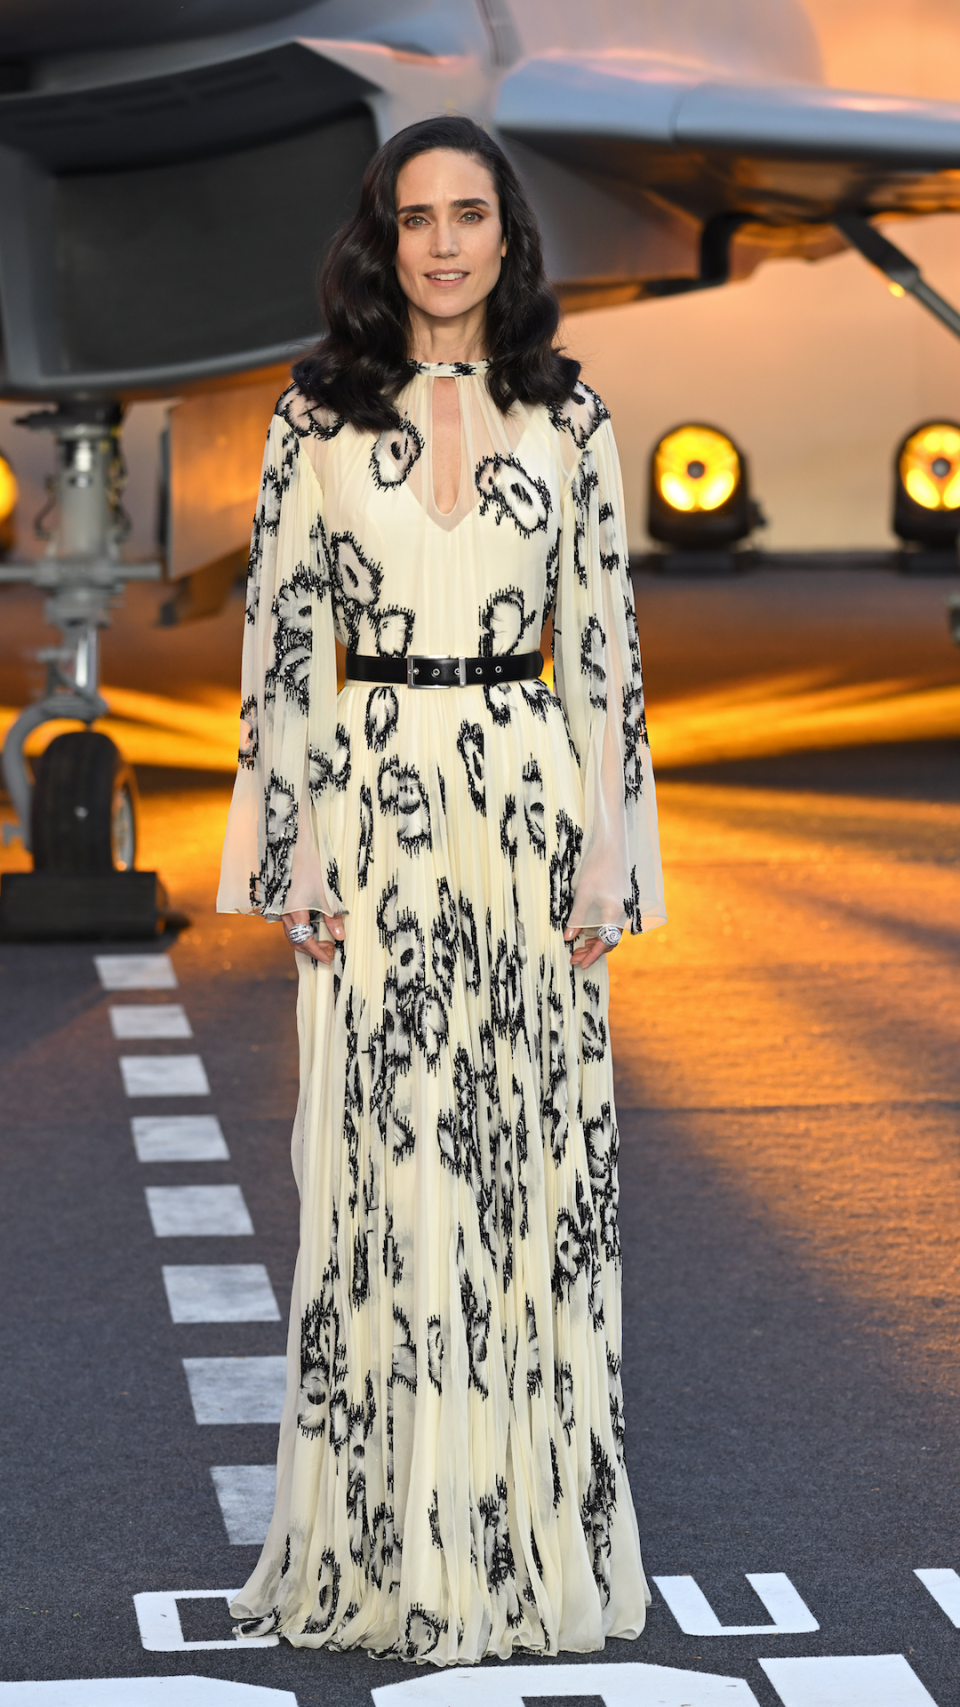 <p> Looking like a certified Hollywood star, Connelly wowed at the Royal Performance of Top Gun: Maverick in London in 2022. The actress was radiant in an ivory long-sleeved Louis Vuitton gown, which featured an edgy black print and a cut-out neckline, as well as elegant draping and a black belt to cinch in her waist. </p>